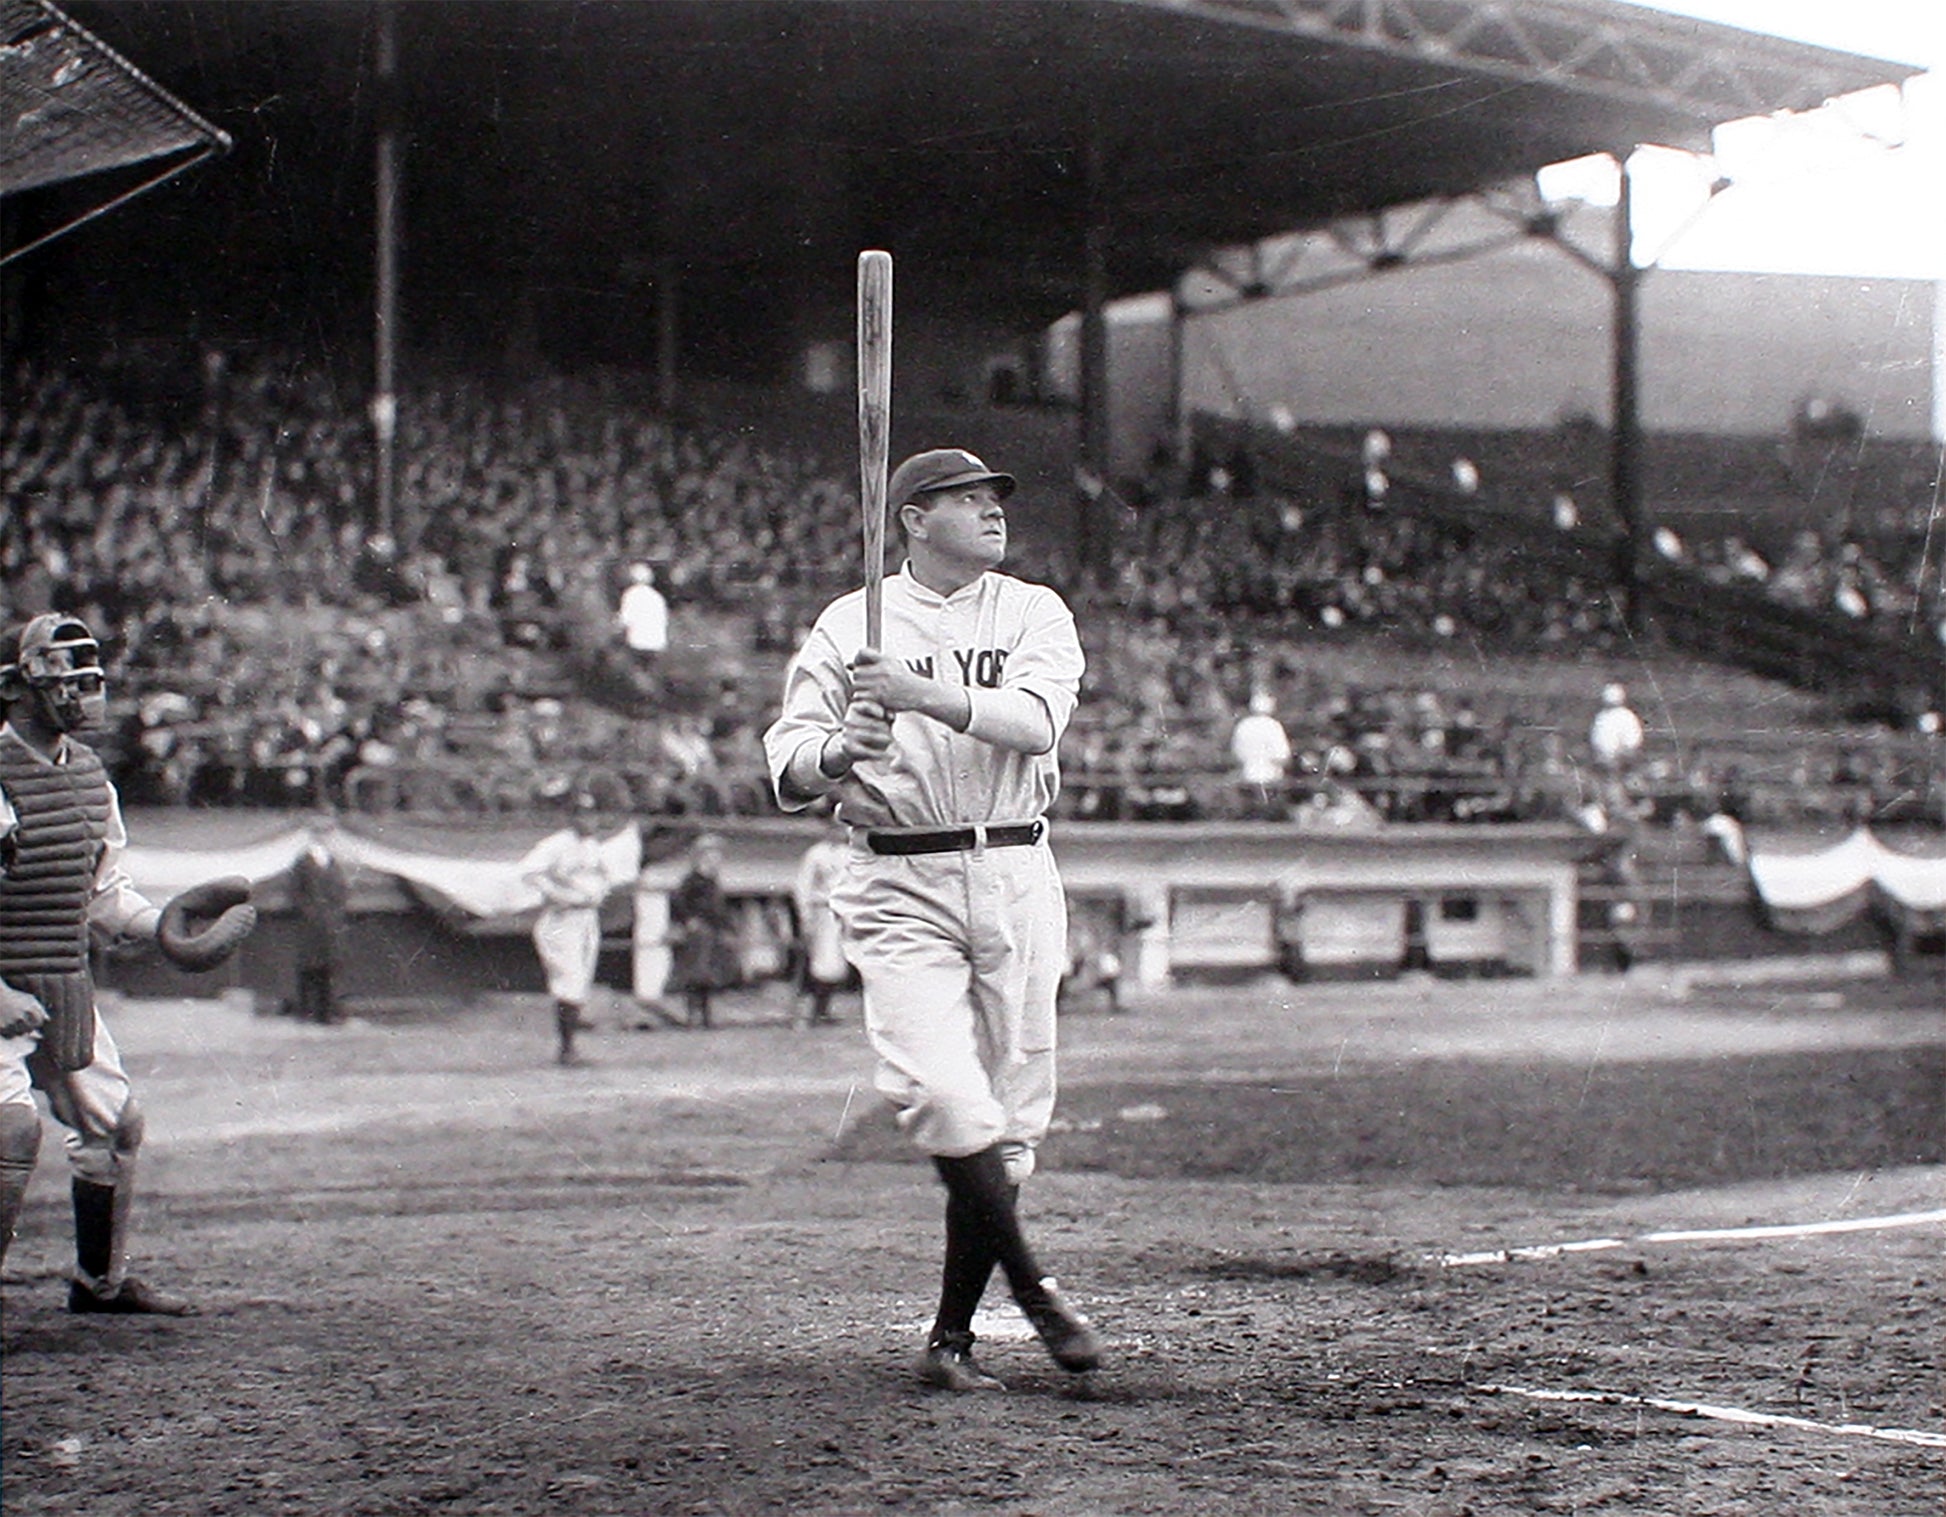 New York Yankees Babe Ruth At The Plate in 1932 8x10 Photo